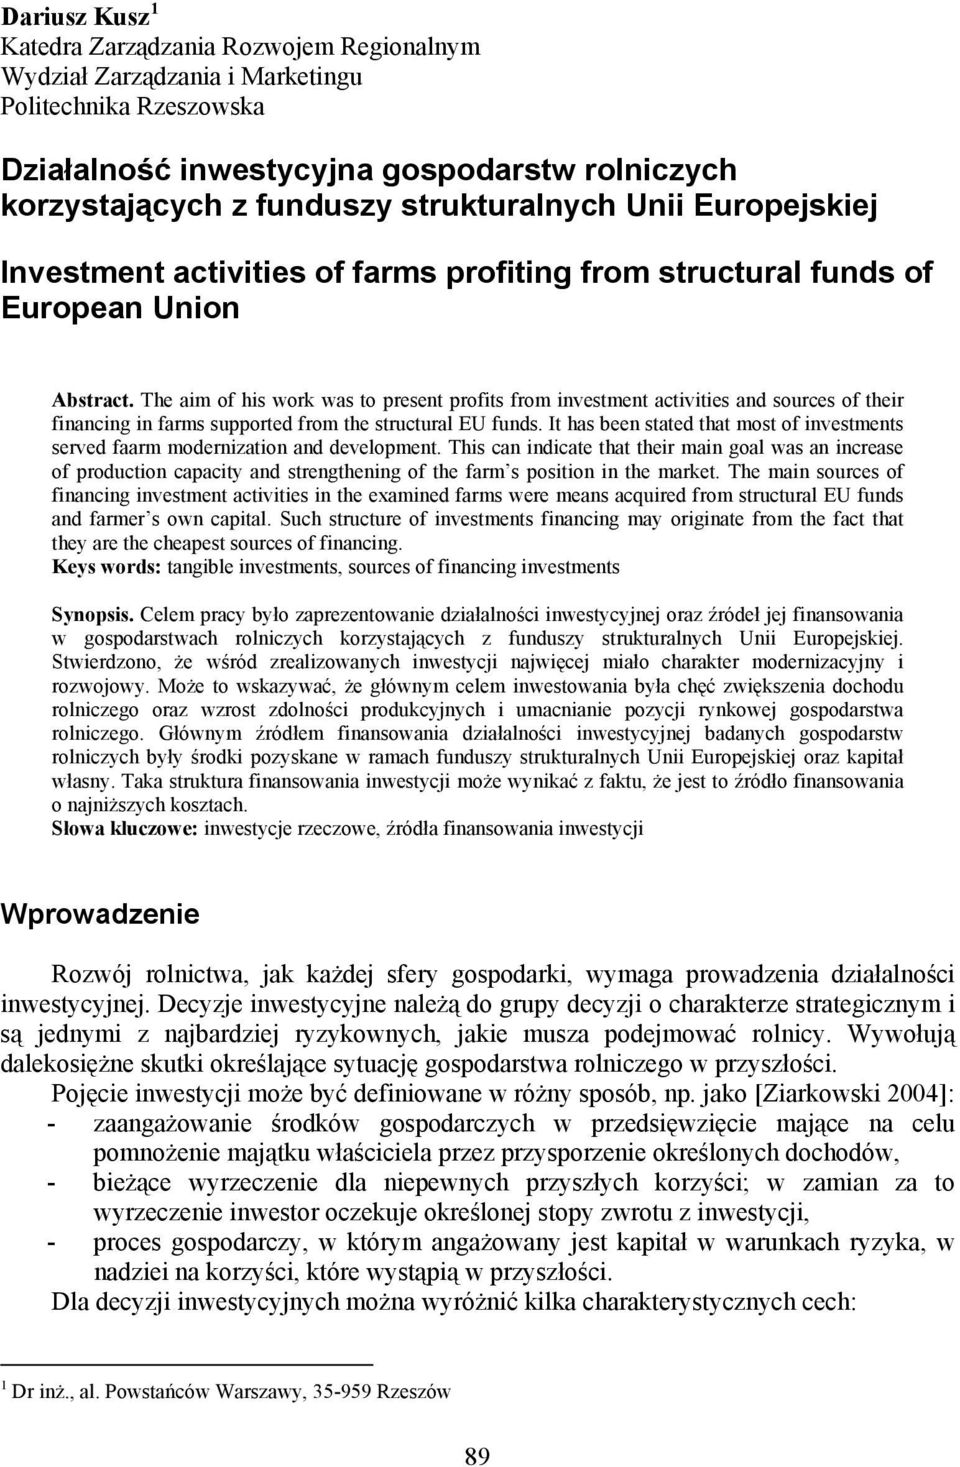 The aim of his work was to present profits from investment activities and sources of their financing in farms supported from the structural EU funds.